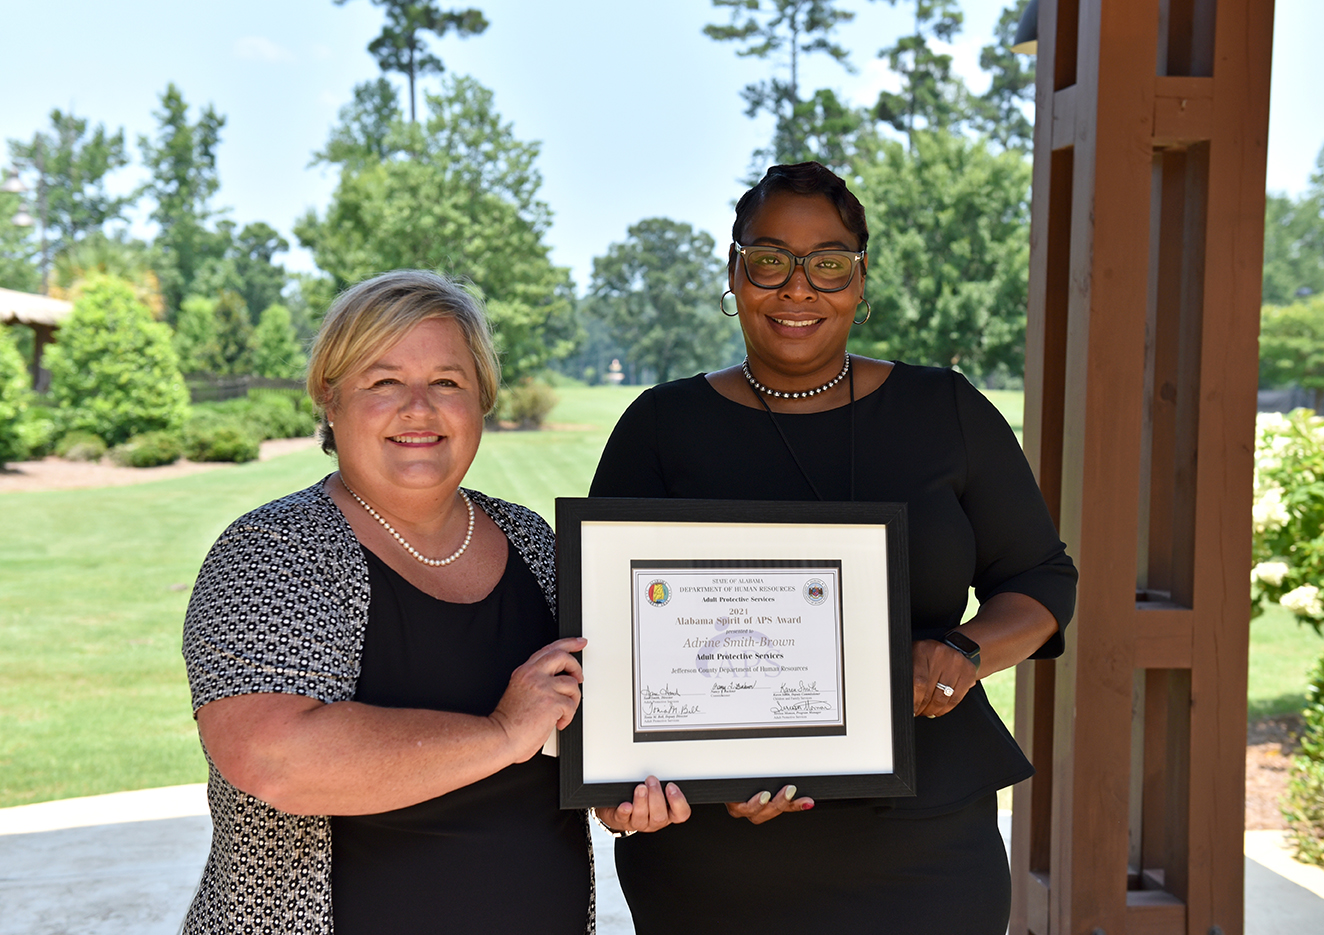 Alabama DHR Deputy Commissioner Karen Smith presents the 2021 Spirit of APS Award to Adrine Smith-Brown at the Adult Protective Services Legal Conference in Opelika.